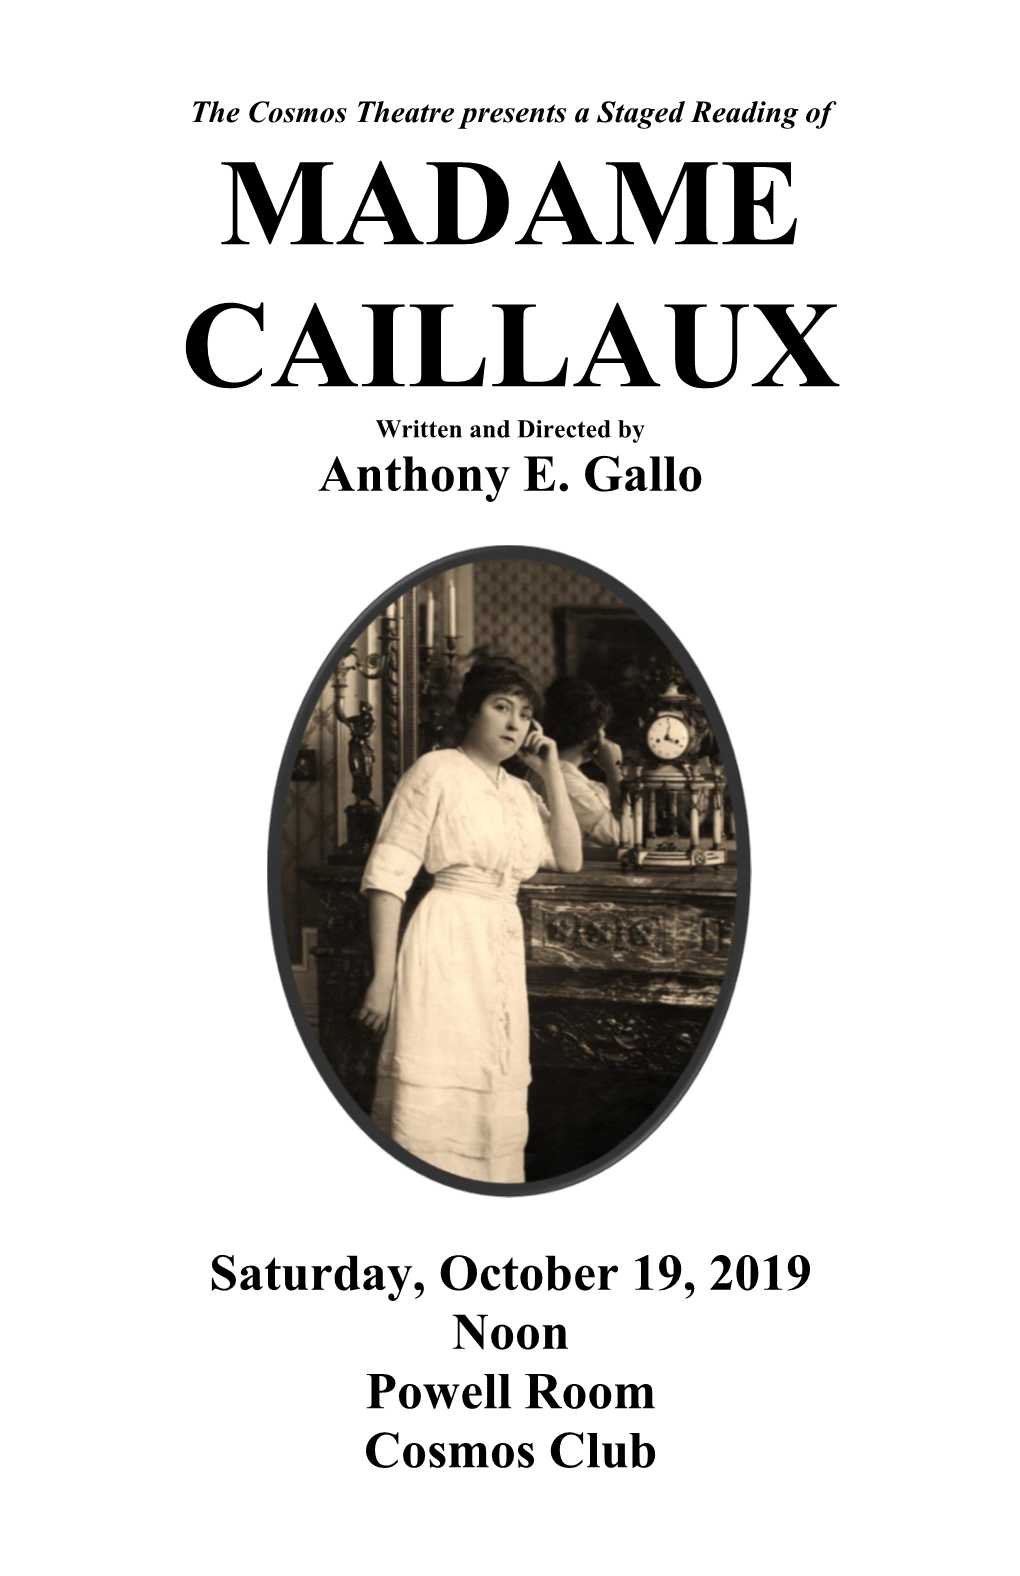 MADAME CAILLAUX Written and Directed by Anthony E